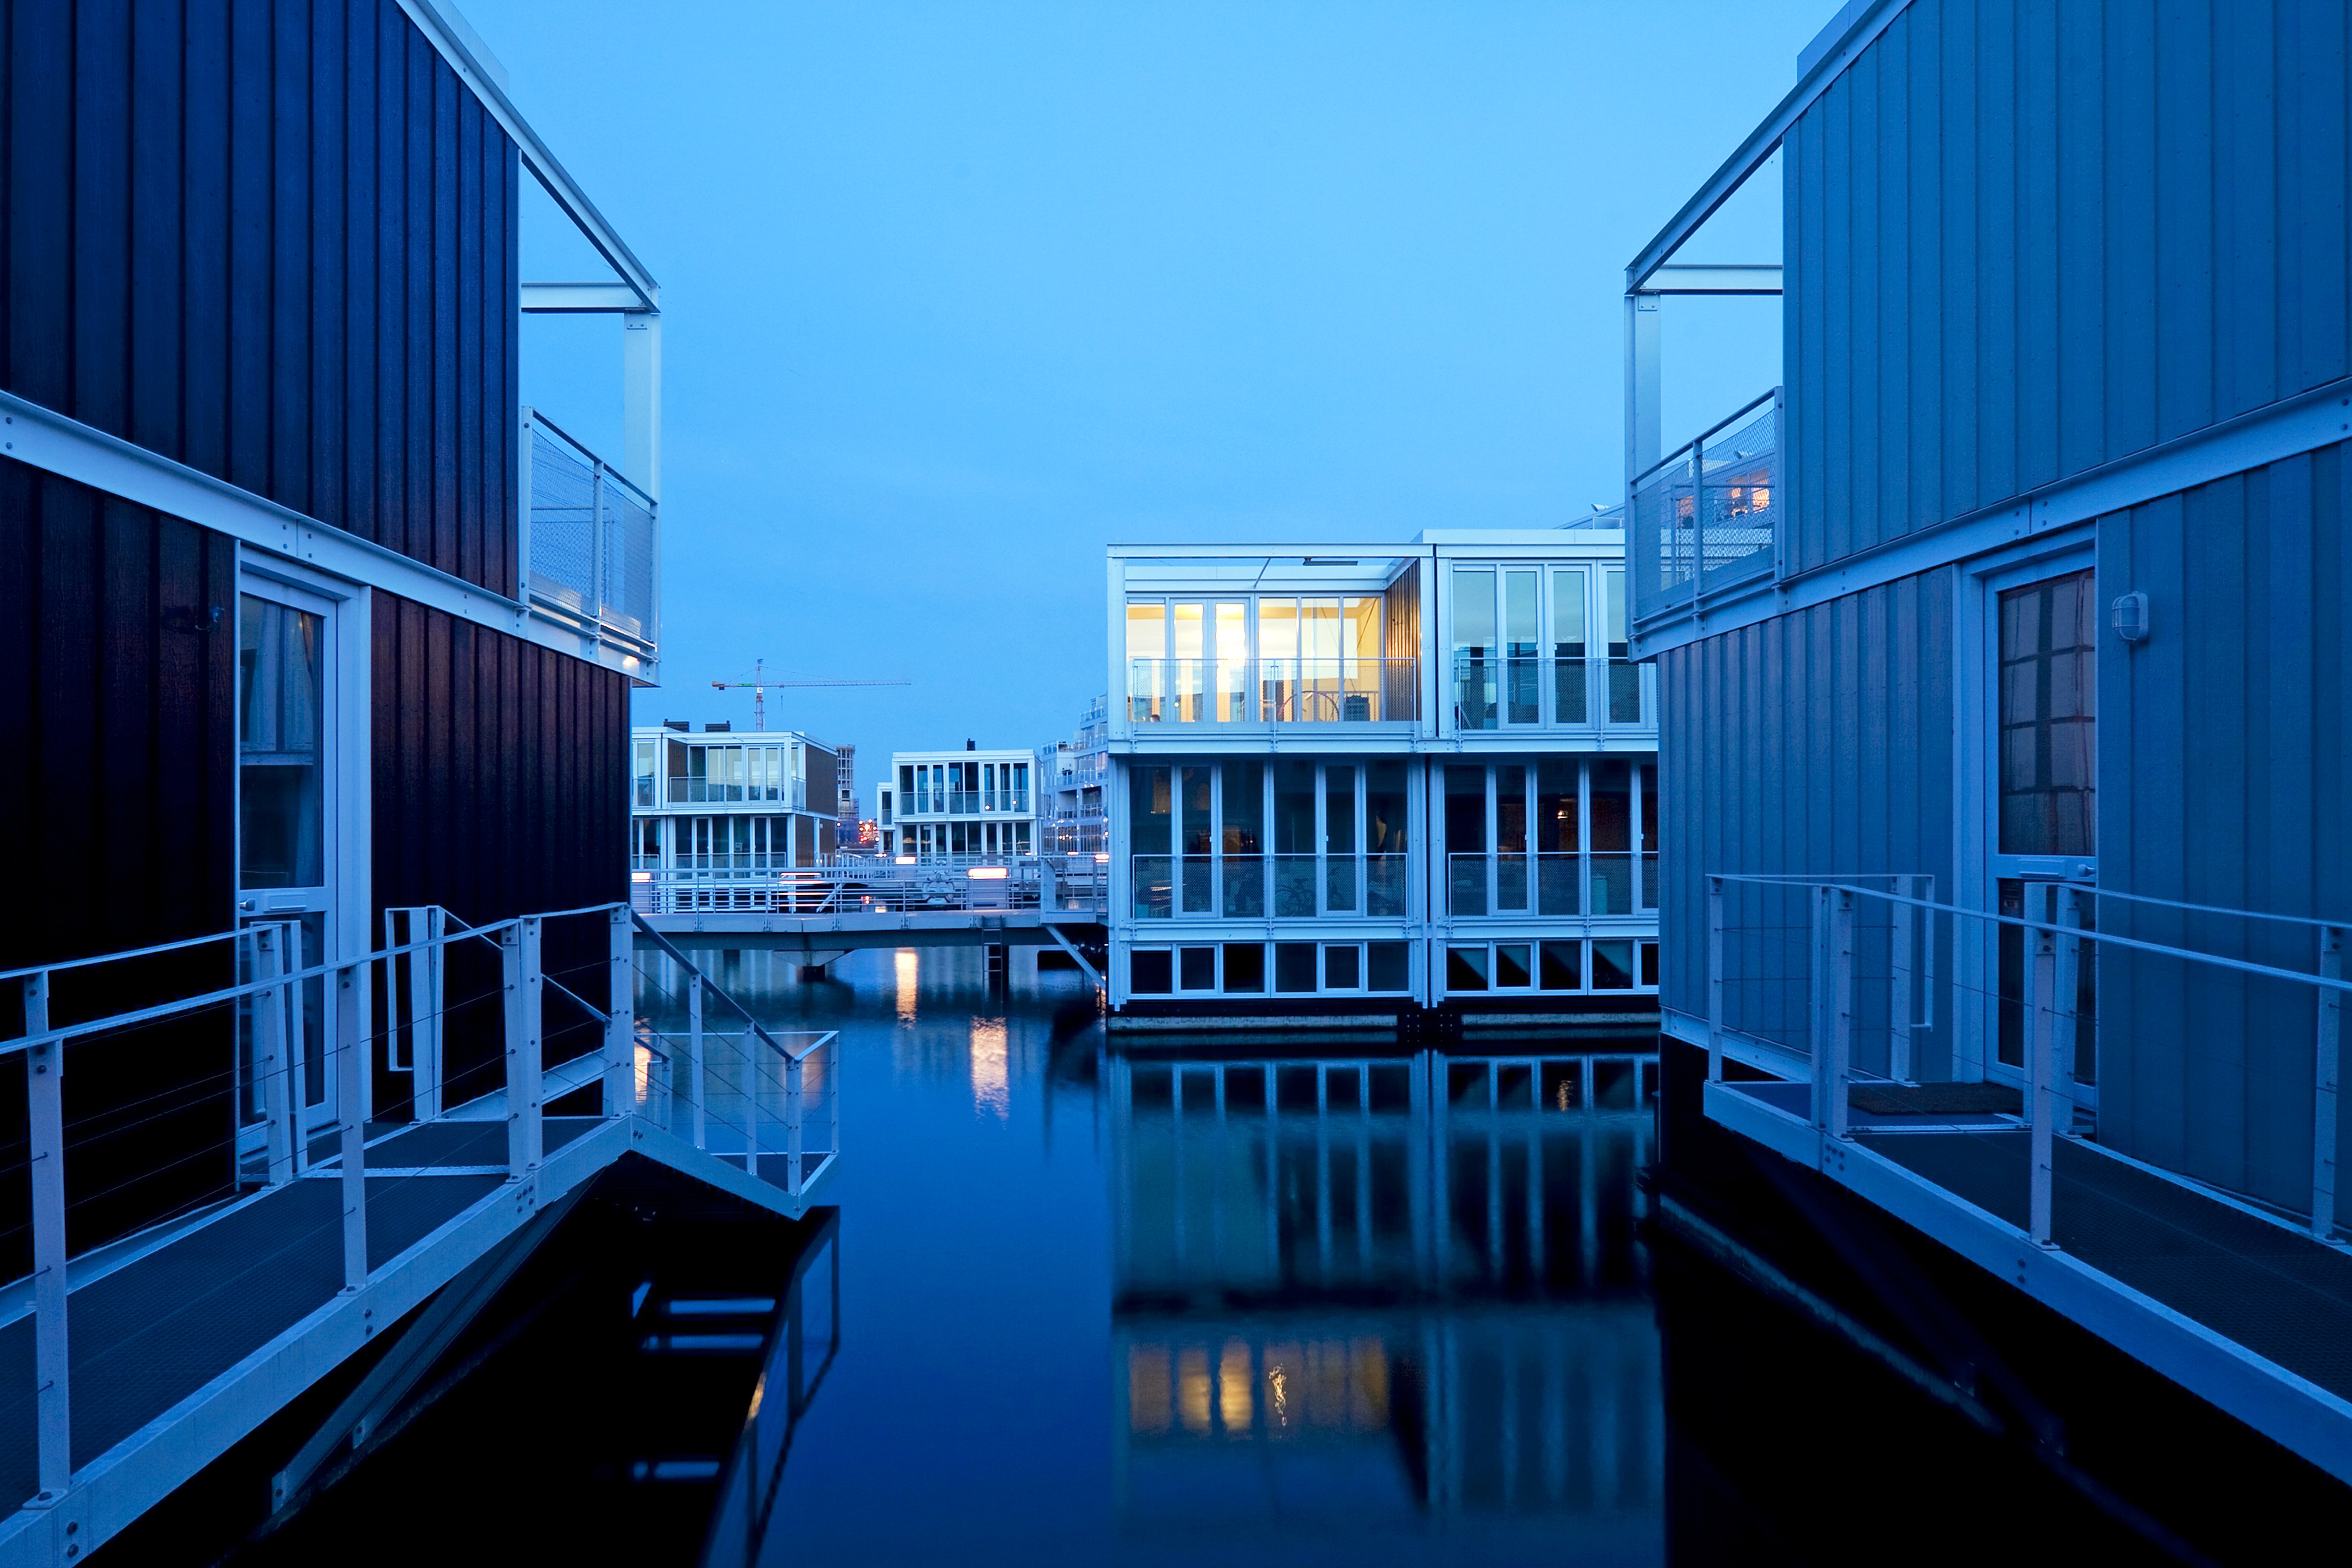 Fifty-five homes float in the IJburg district in east Amsterdam. The structures, designed by  the Dutch firm Marlies Rohmer Architects, sit on hollow concrete "tubs" that are submerged half a story. (Luuk Kramer)